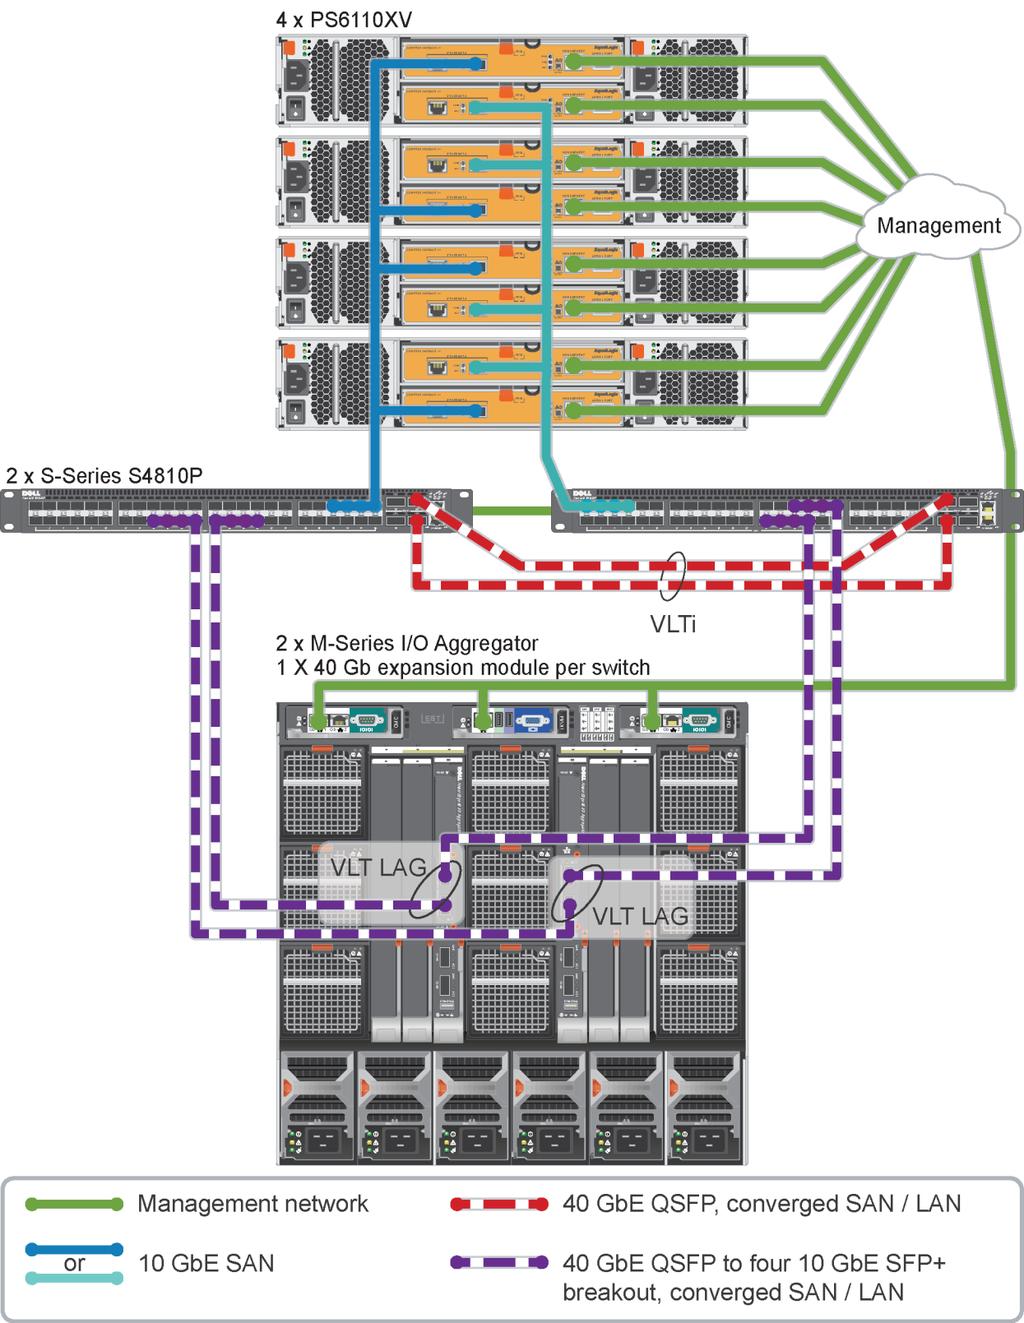 Active System 800 -- Force10 S4810P with VLTi / IOA with VLT LAG uplinks 22 Dell PowerEdge